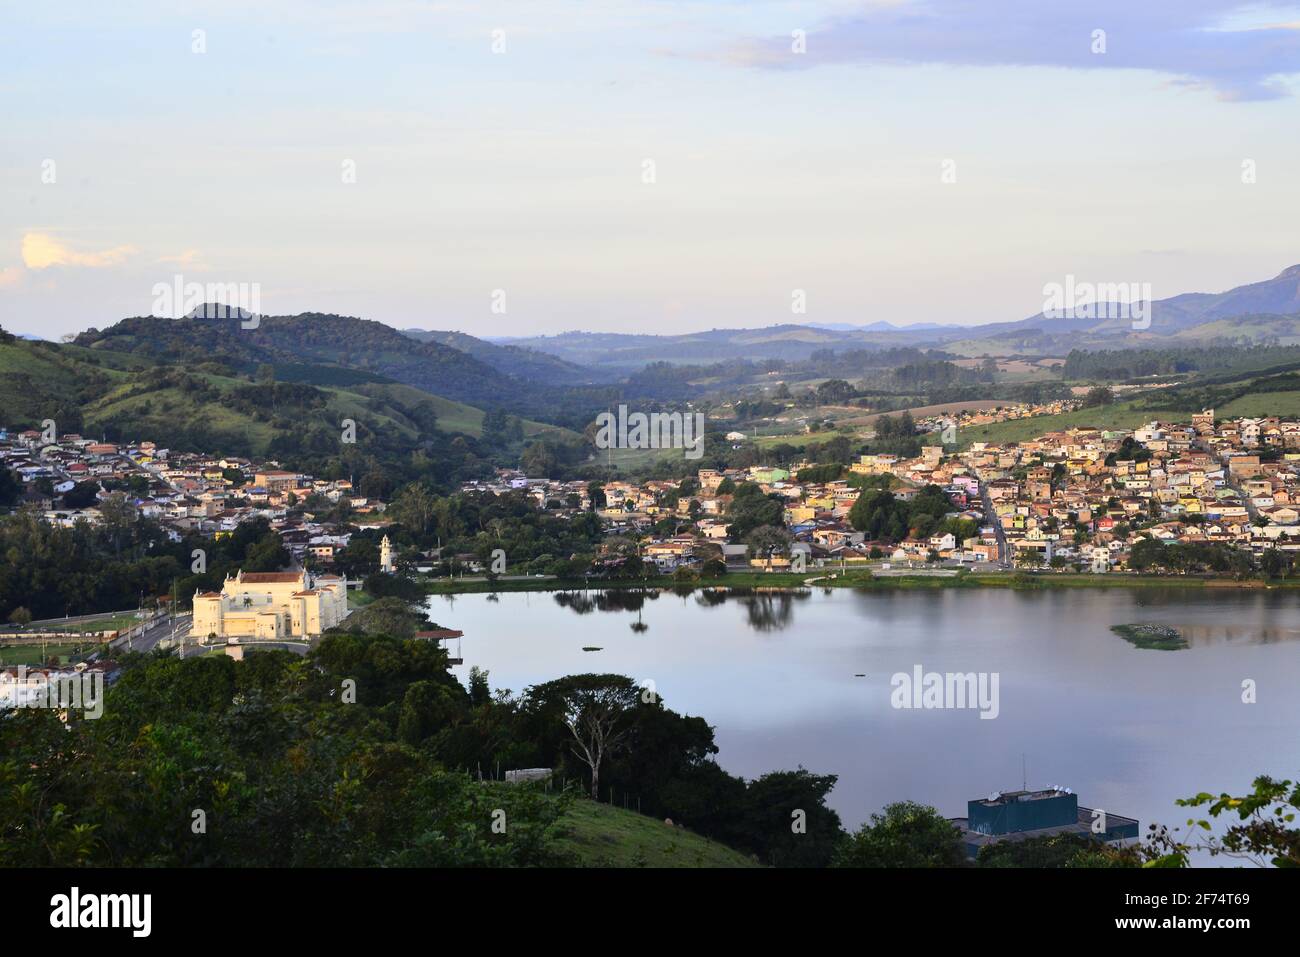 Lambari town in Minas Gerais Estate, a place famous by his mineral water and a popular destination for tourists, Brazil Stock Photo